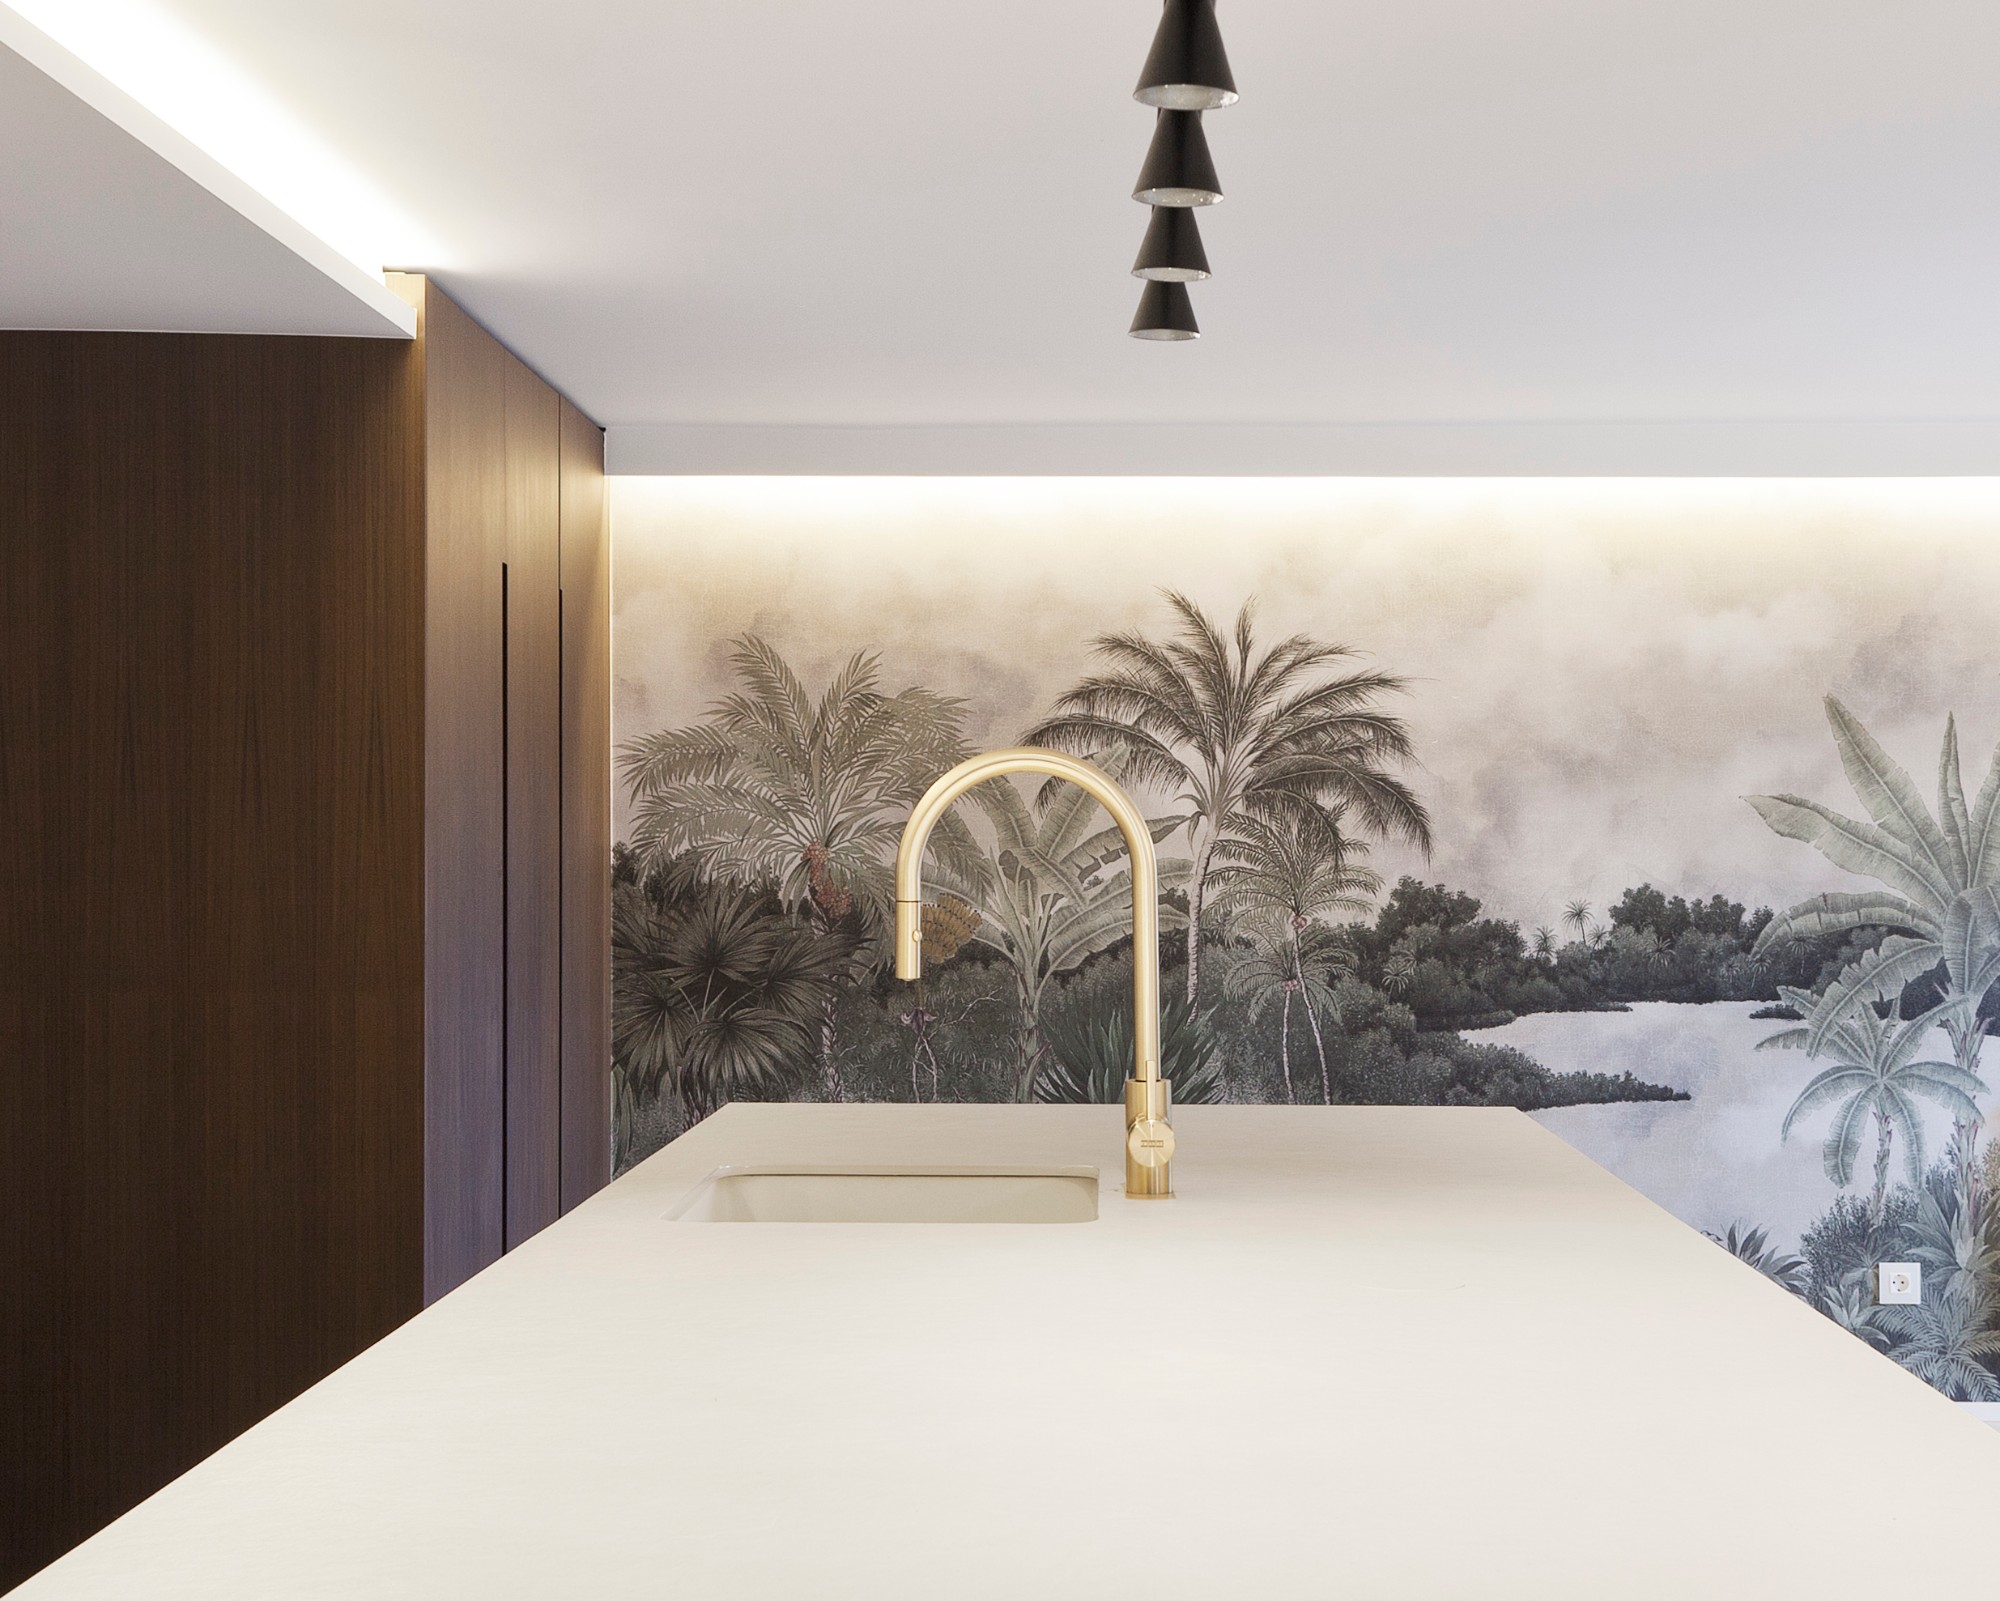 Image of MG 2803b in An exceptional modern haven facing the Aegean Sea that uses Dekton to blur the boundaries between inside and outside - Cosentino